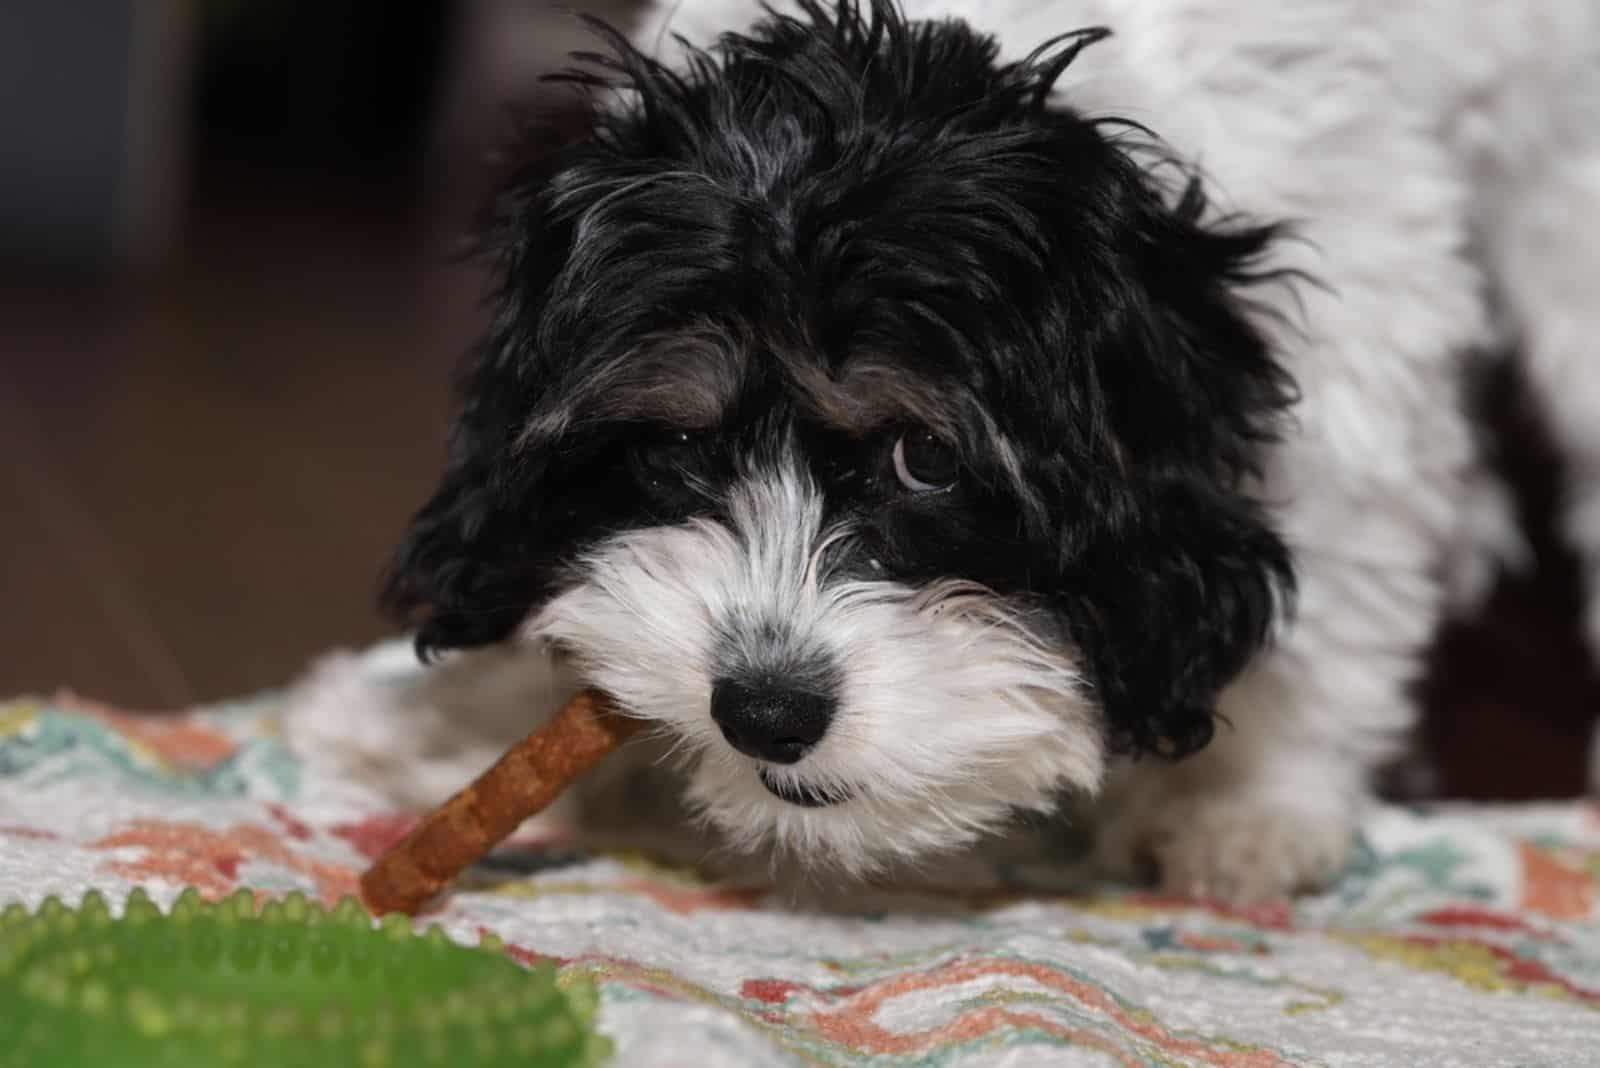 7 Healthiest And Best Treats For Cavapoo Puppies